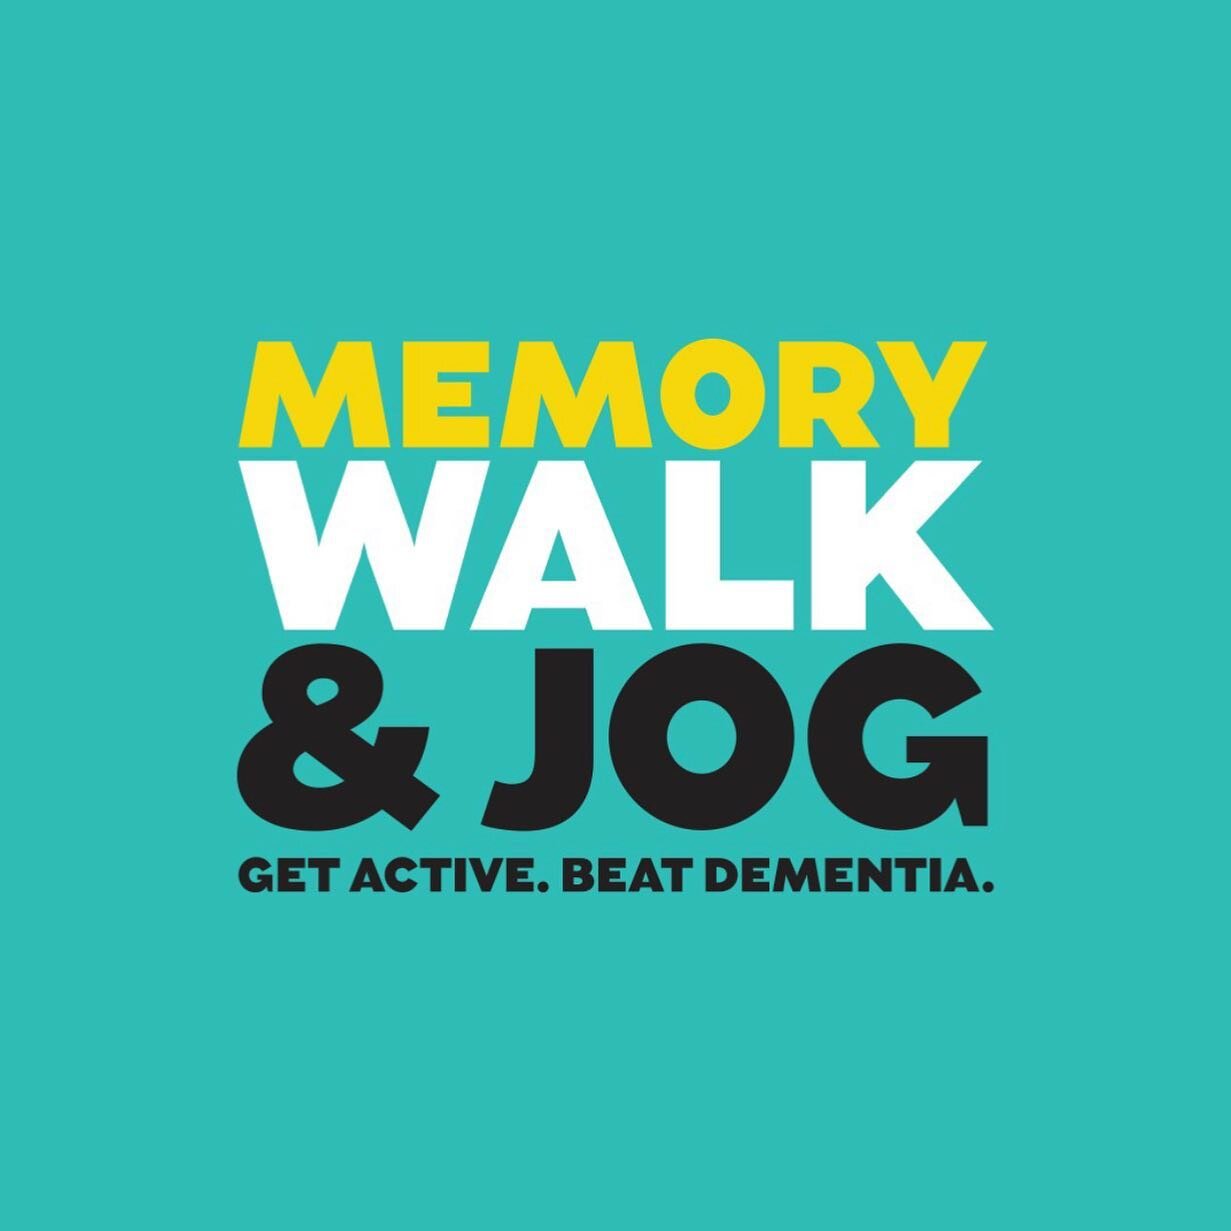 Hey! Guess what? We&rsquo;re taking time out from posting beautiful blinds and shutters to give you some important news!

Barrierscreens is joining a walk to beat dementia. This is a cause that&rsquo;s very dear to many of us and we&rsquo;ll be joini